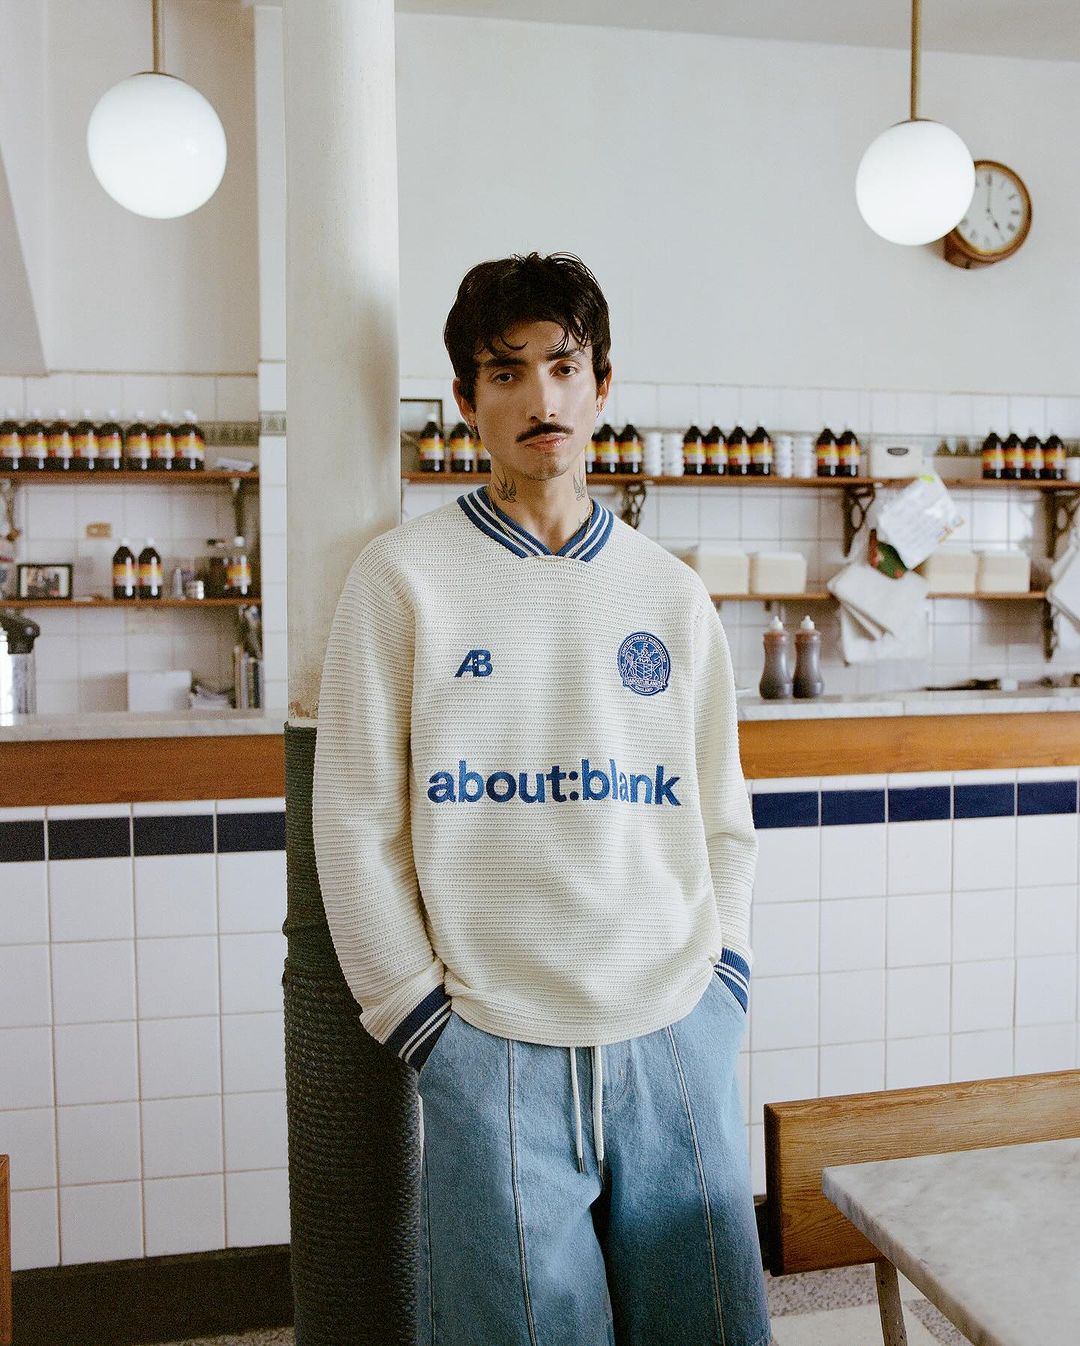 SS24 april-capsule  Gustavo styles our football-focused capsule collection for spring-summer ’24, launching Tuesday 30th April, 4pm BST for a-b - members only  For sizing reference, Gus is 6’1 - 1.86m with a slim build, he w (1).jpg__PID:d5a856f2-e169-49b1-be0e-b1c546c672d9